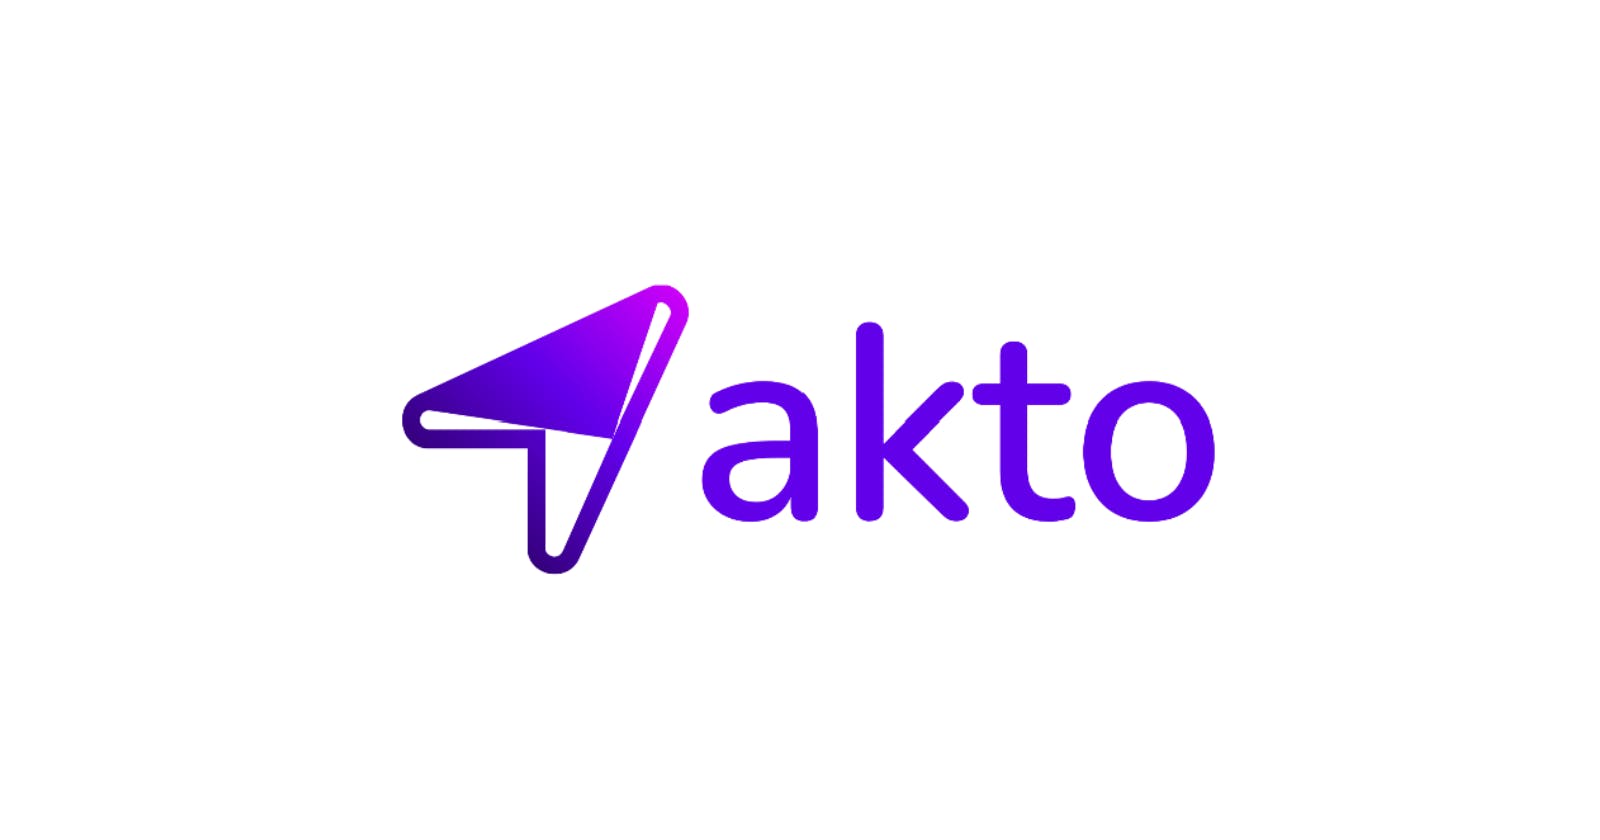 How to create automated inventory using Akto❓